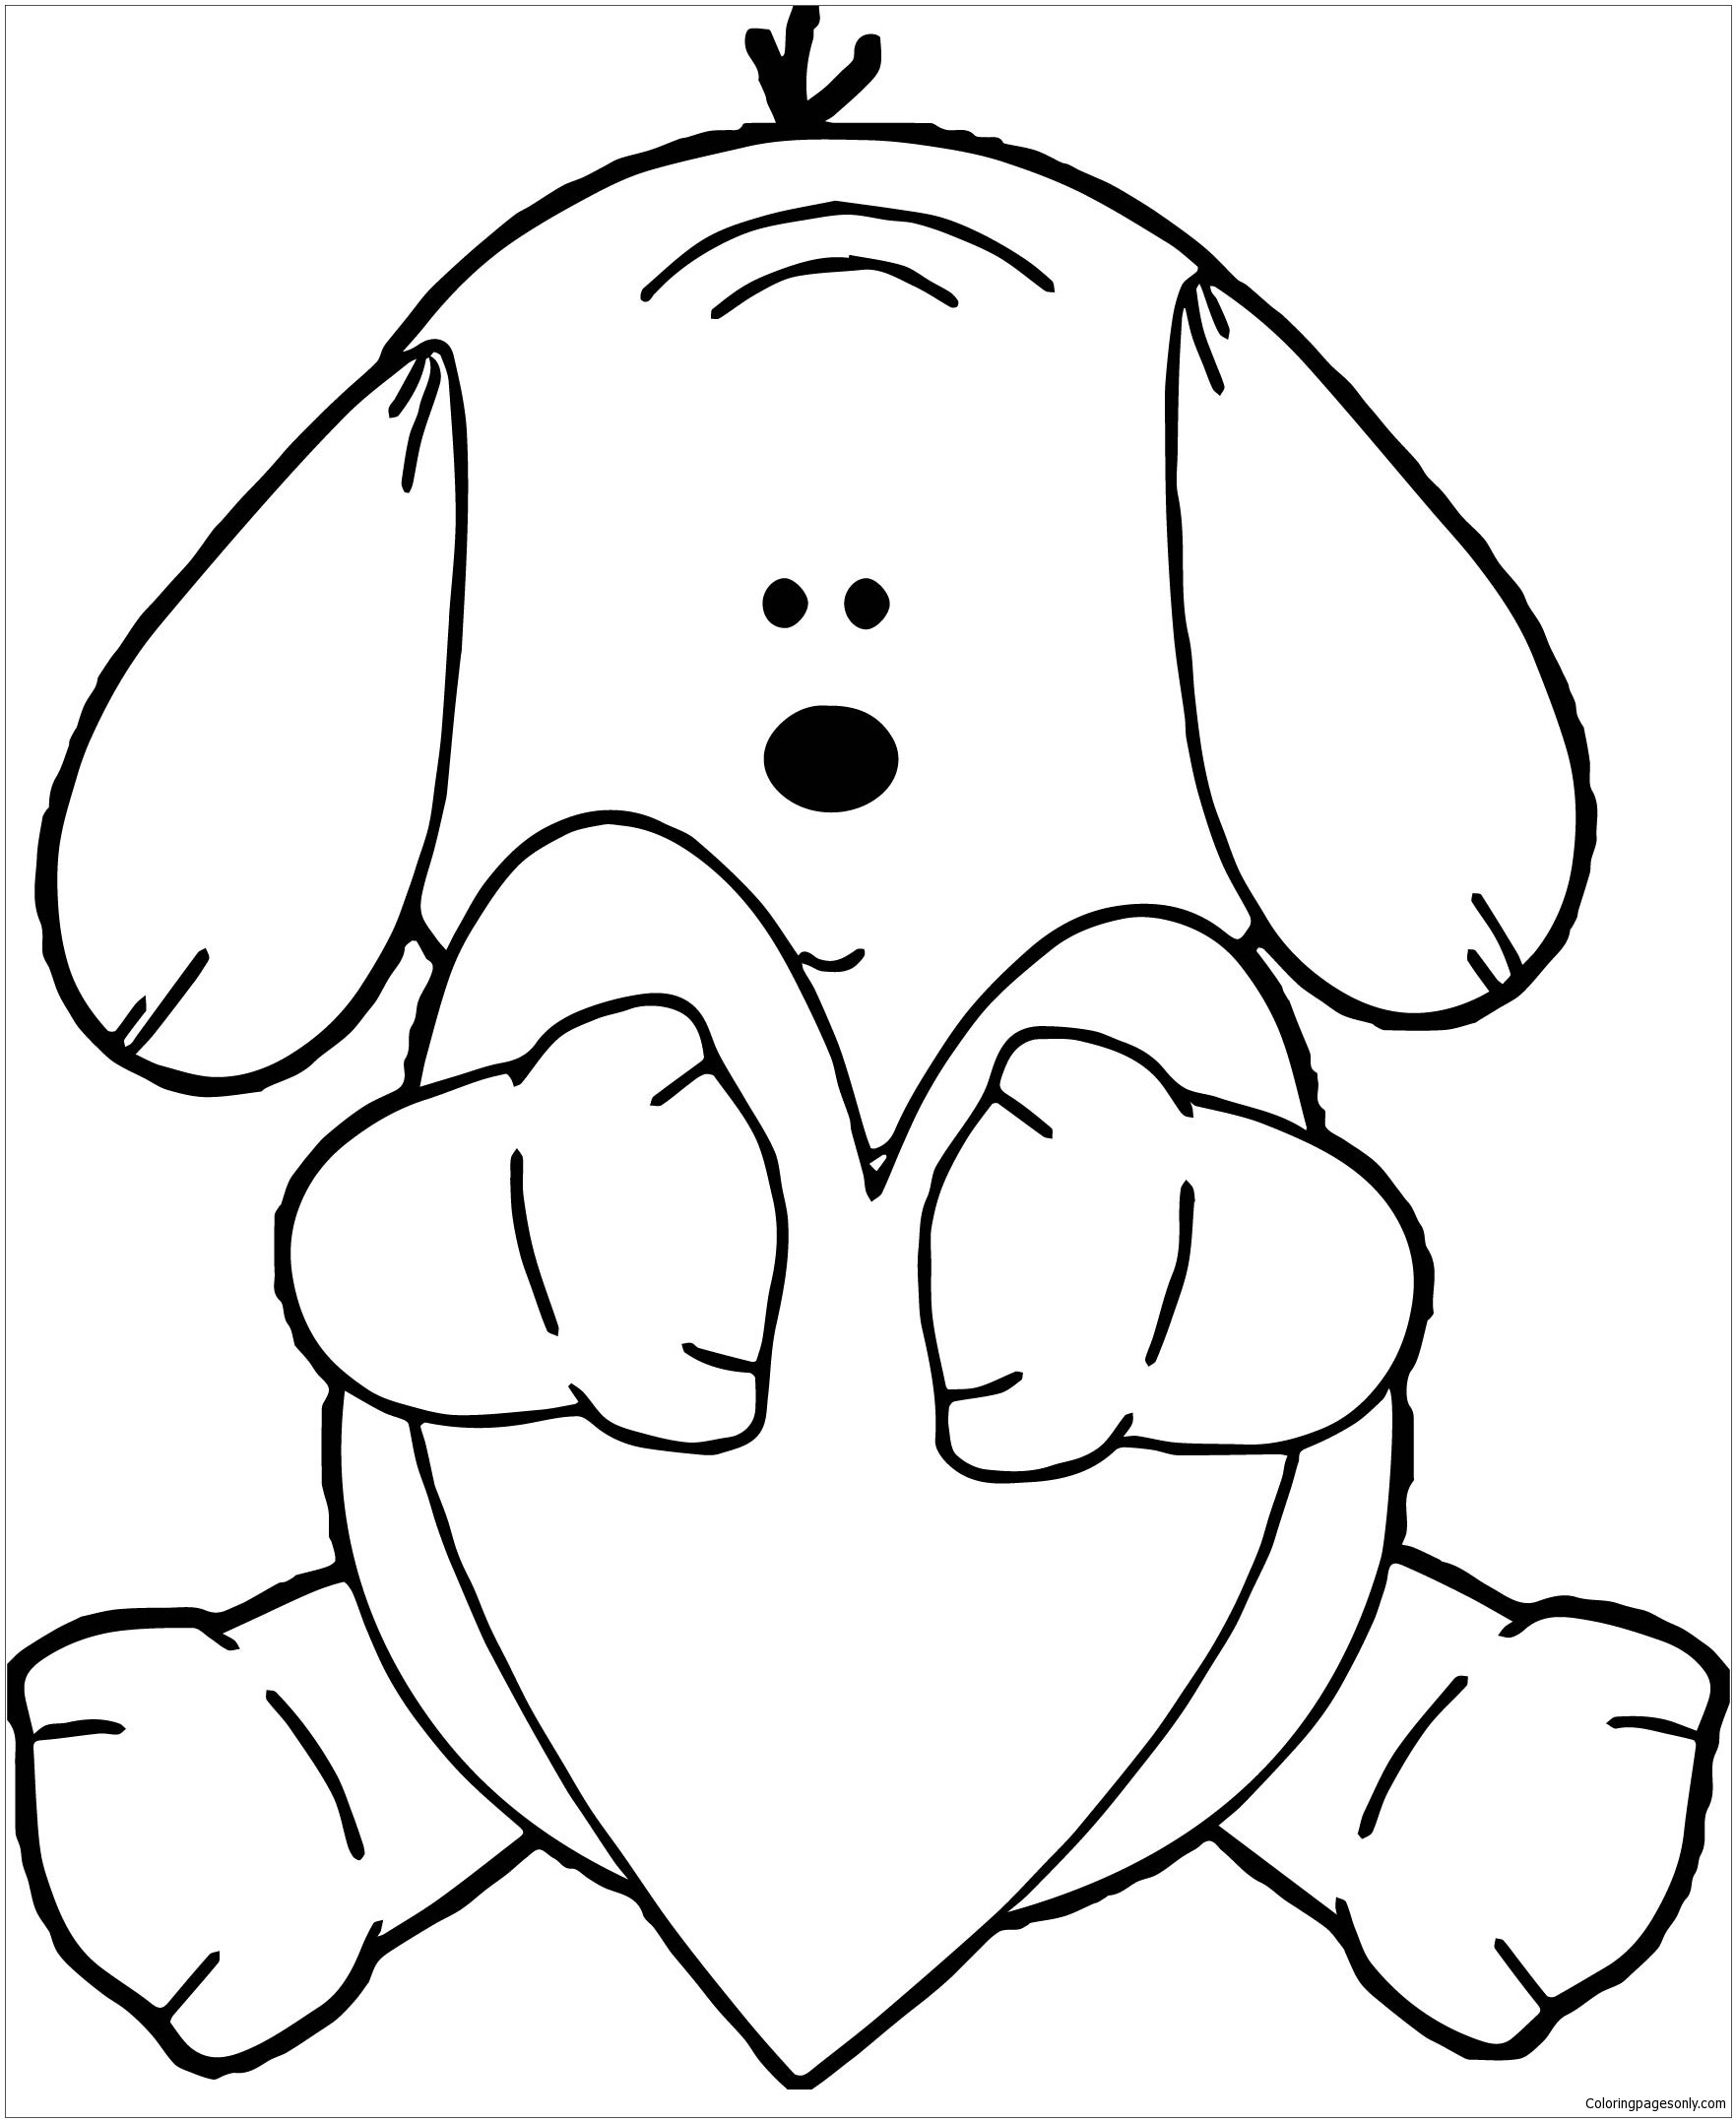 coloring : Puppy Dog Coloring Pages New Puppy Hugging Heart Dog Puppy Coloring  Page Free Coloring Puppy Dog Coloring Pages ~ queens